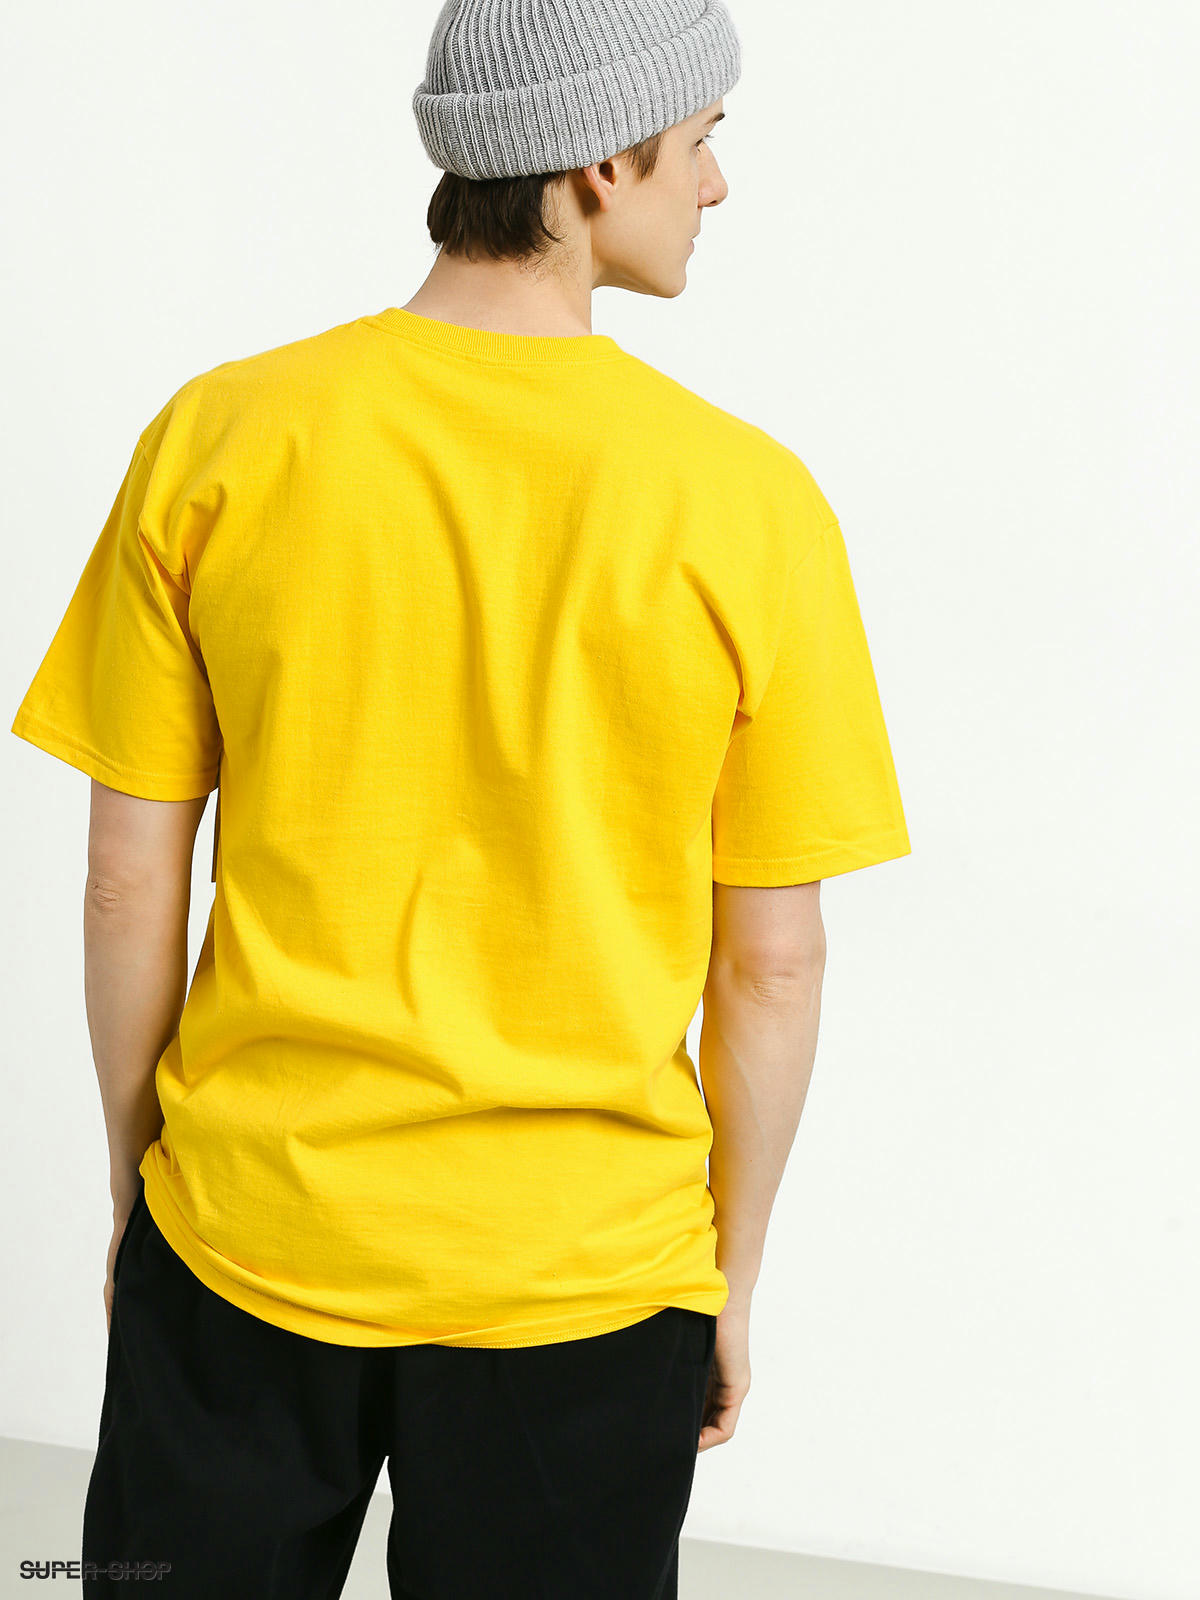 Diamond Supply Co. Fishing For Compliments Skate T-Shirt - Yellow Size